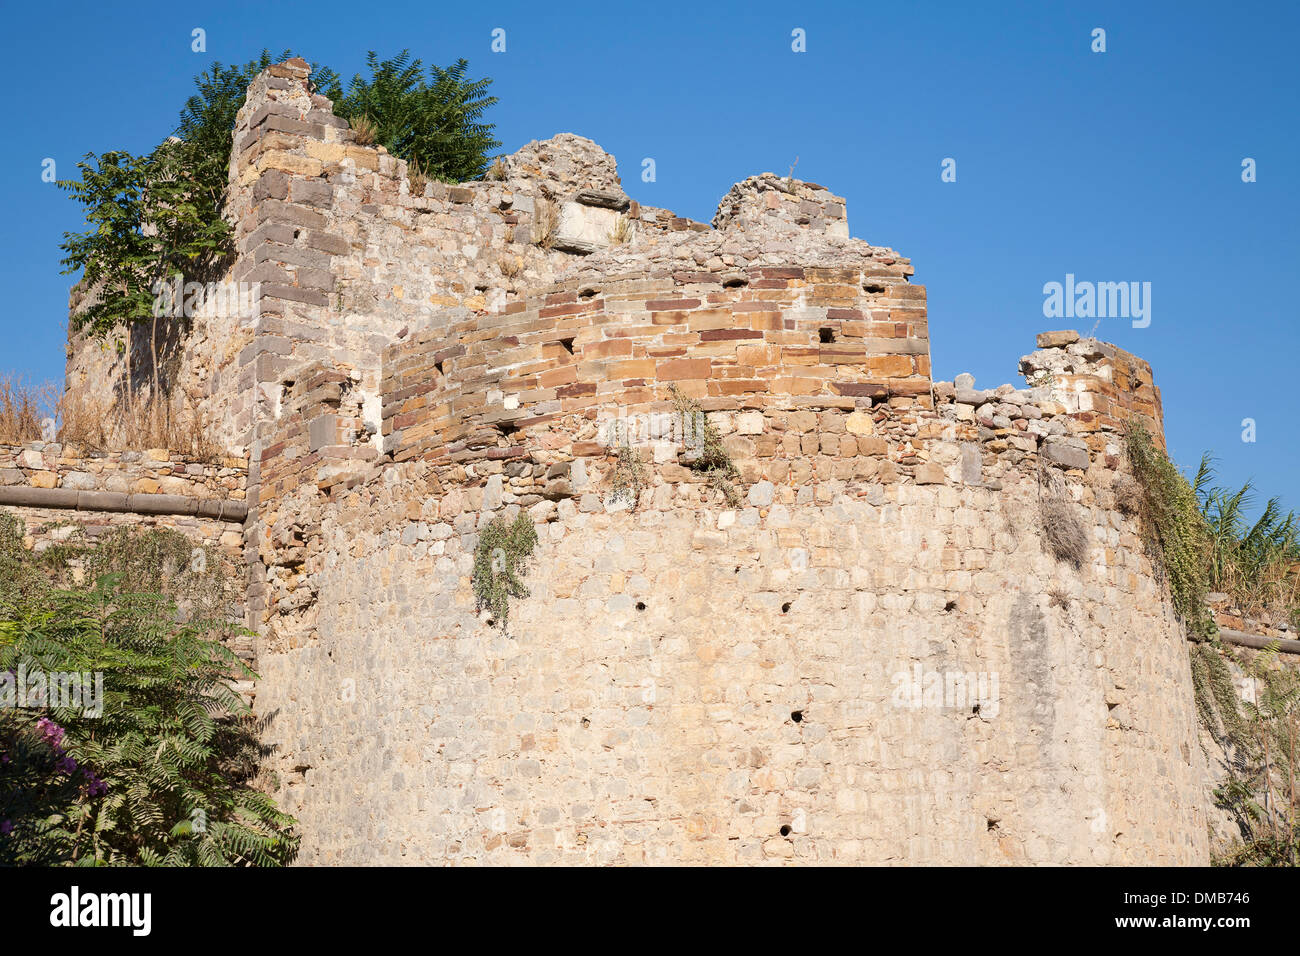 genoese castle, chios city, island of chios, north east aegean sea, greece, europe Stock Photo